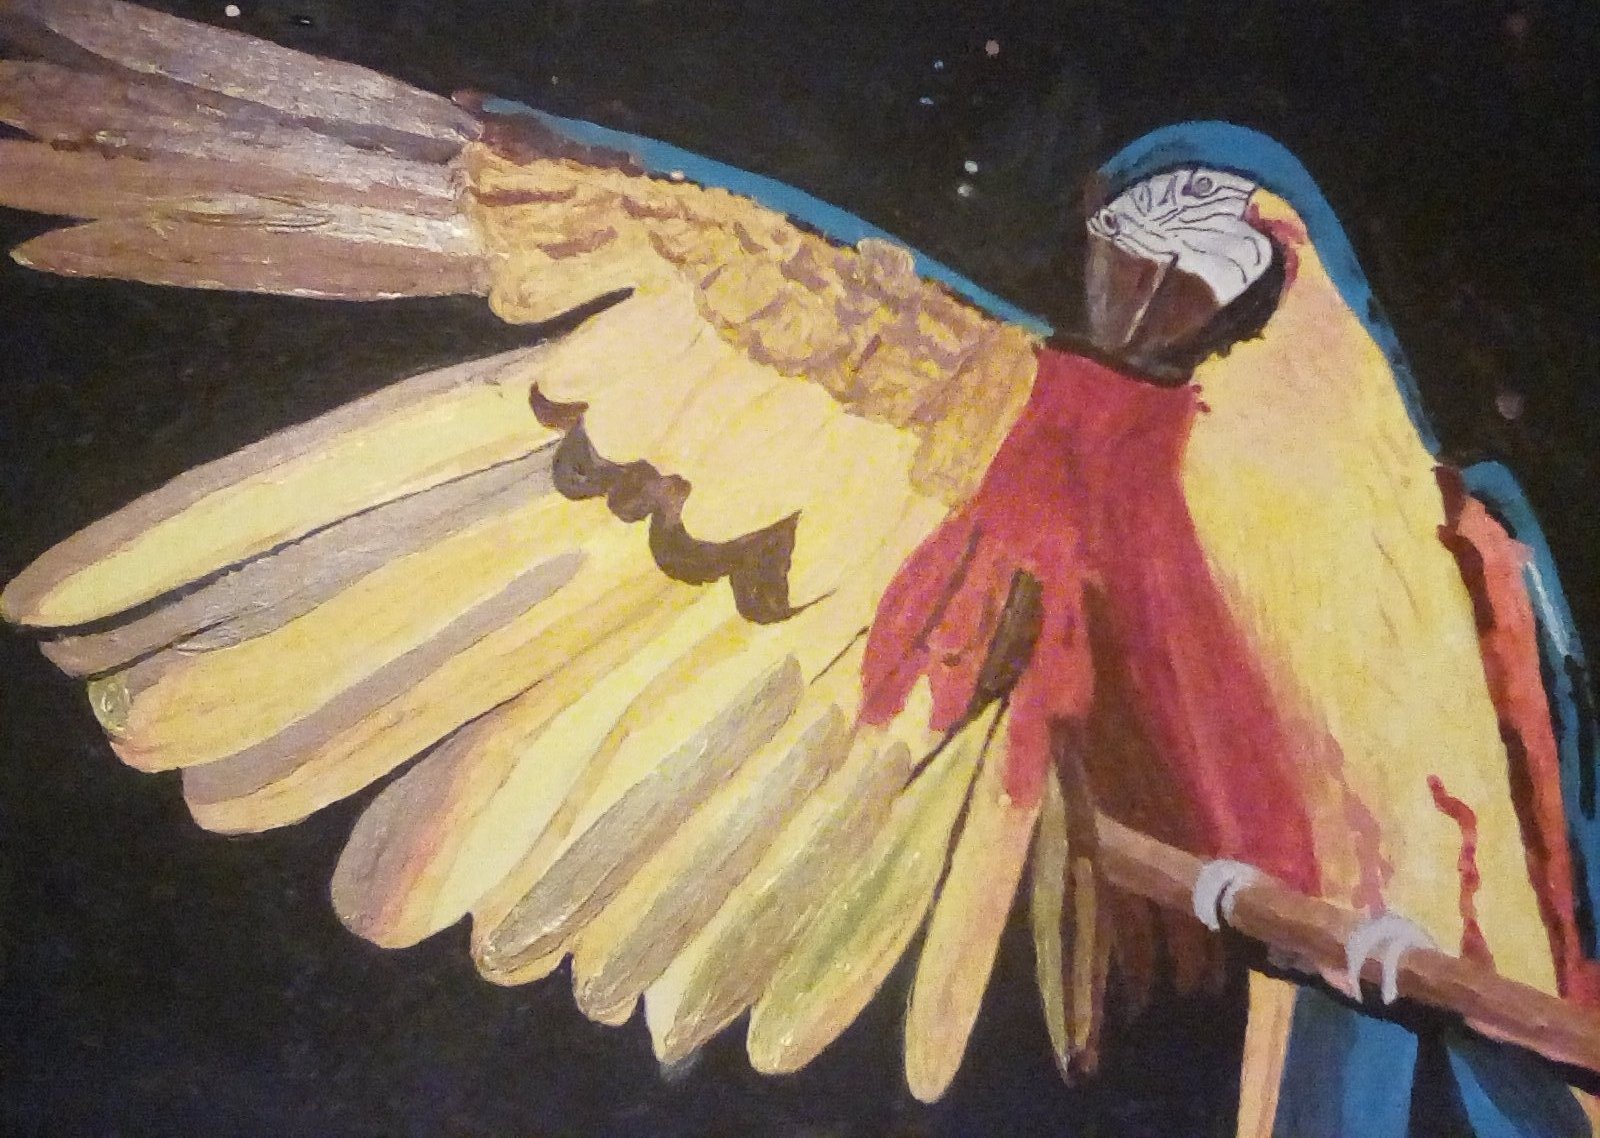 The finished painting of the parrot.